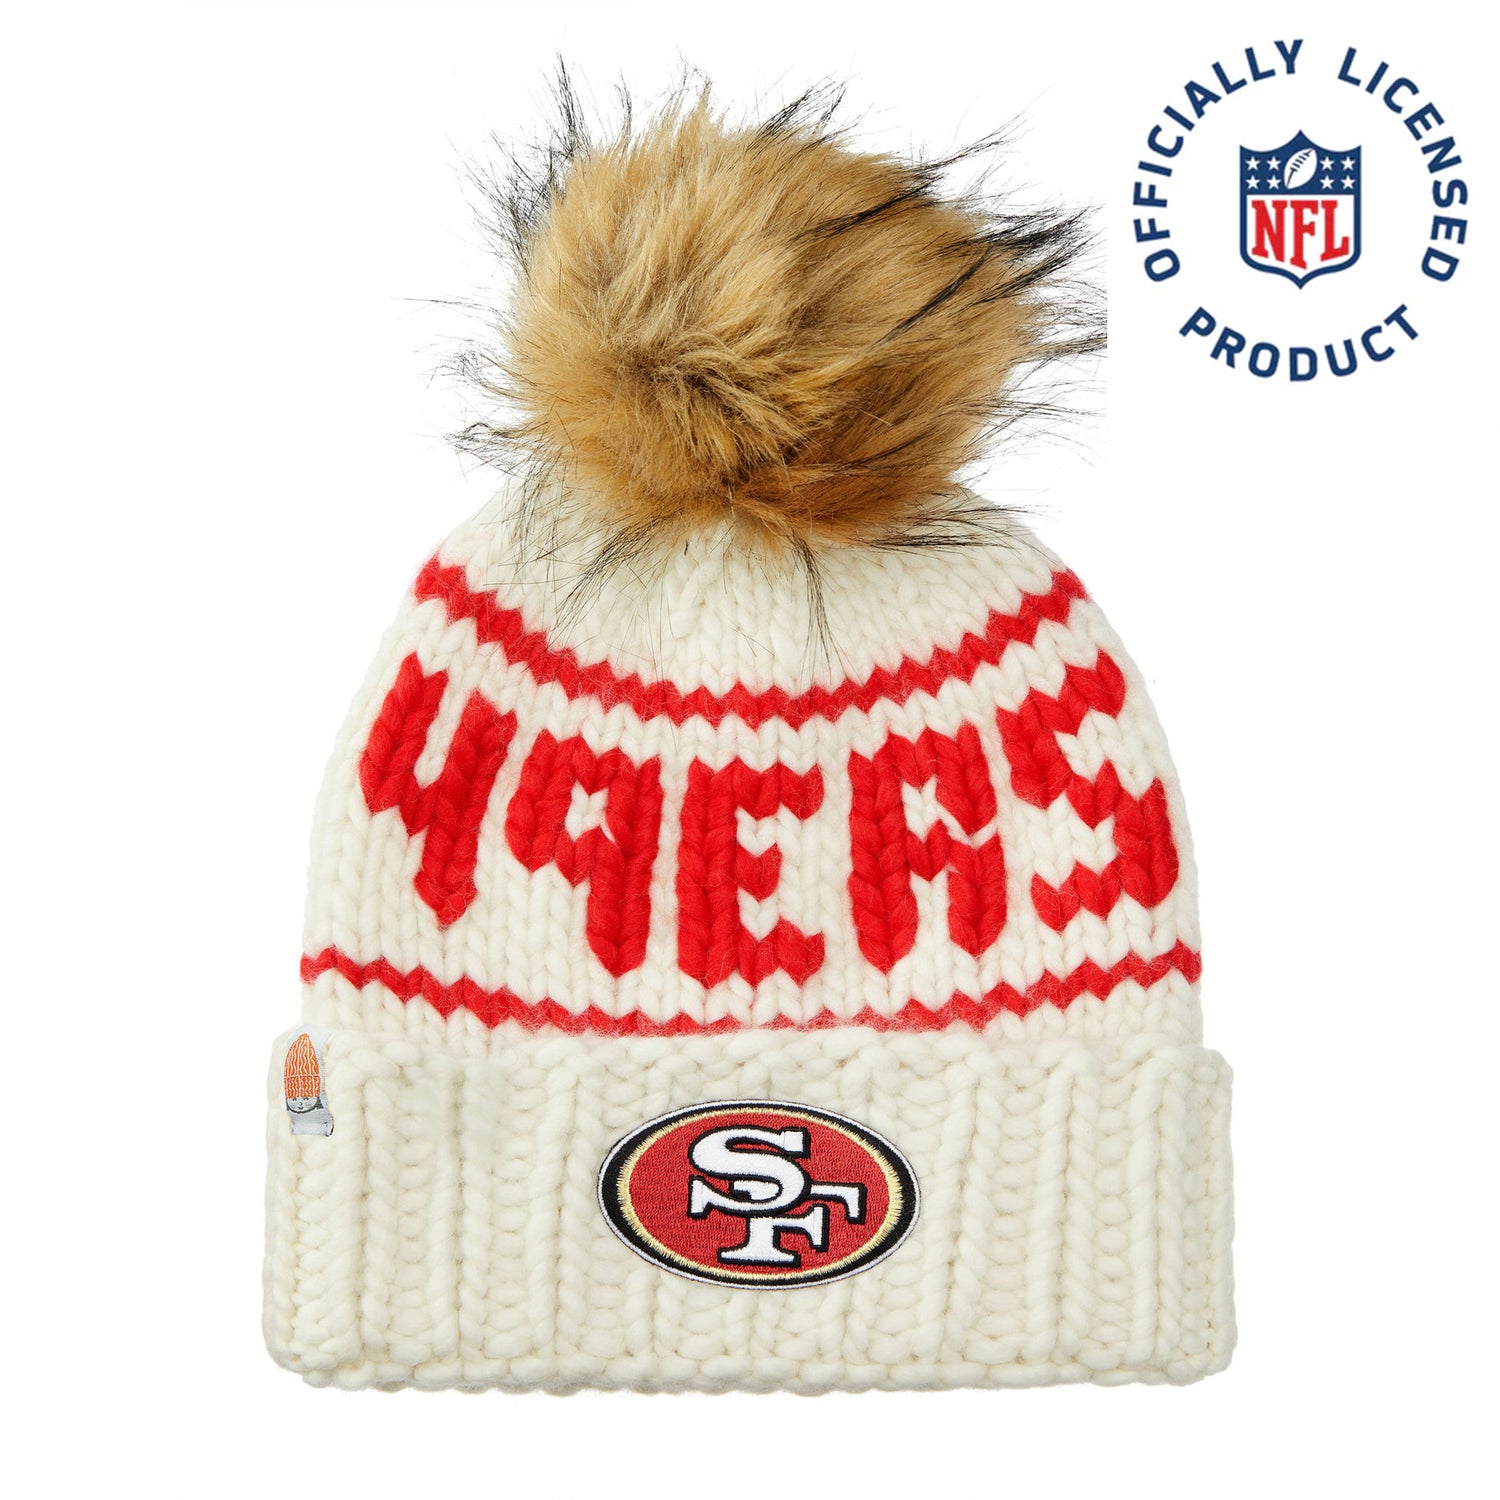 The 49ers NFL Beanie with Faux Fur Pom